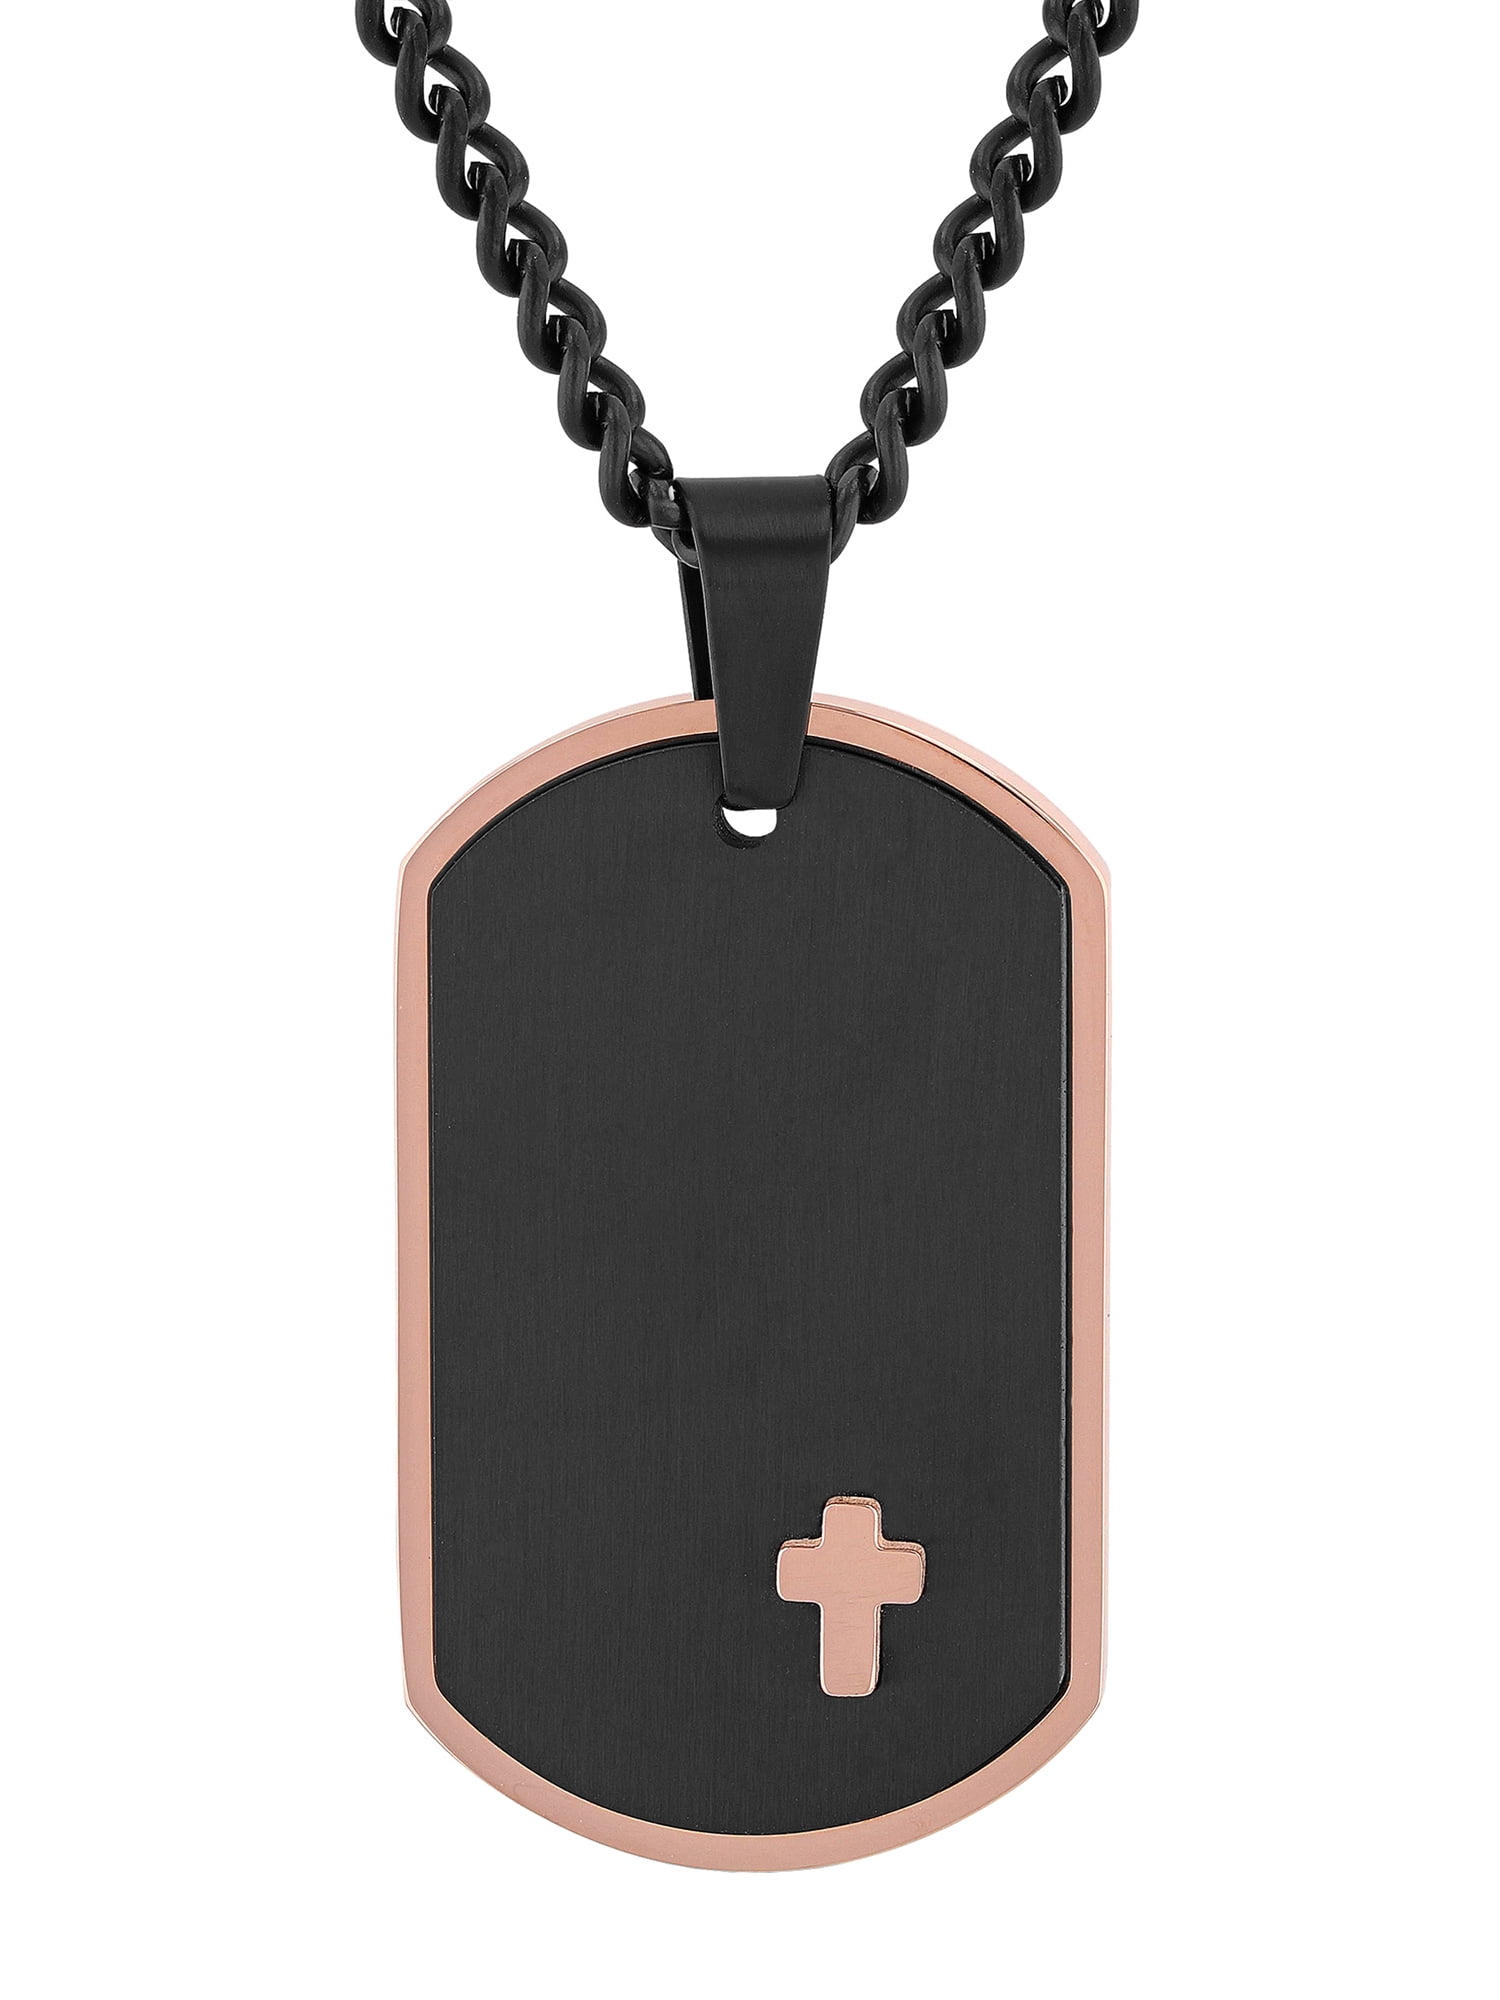 Men's Stainless Steel Black & Rose-Tone Dog Tag Pendant Necklace